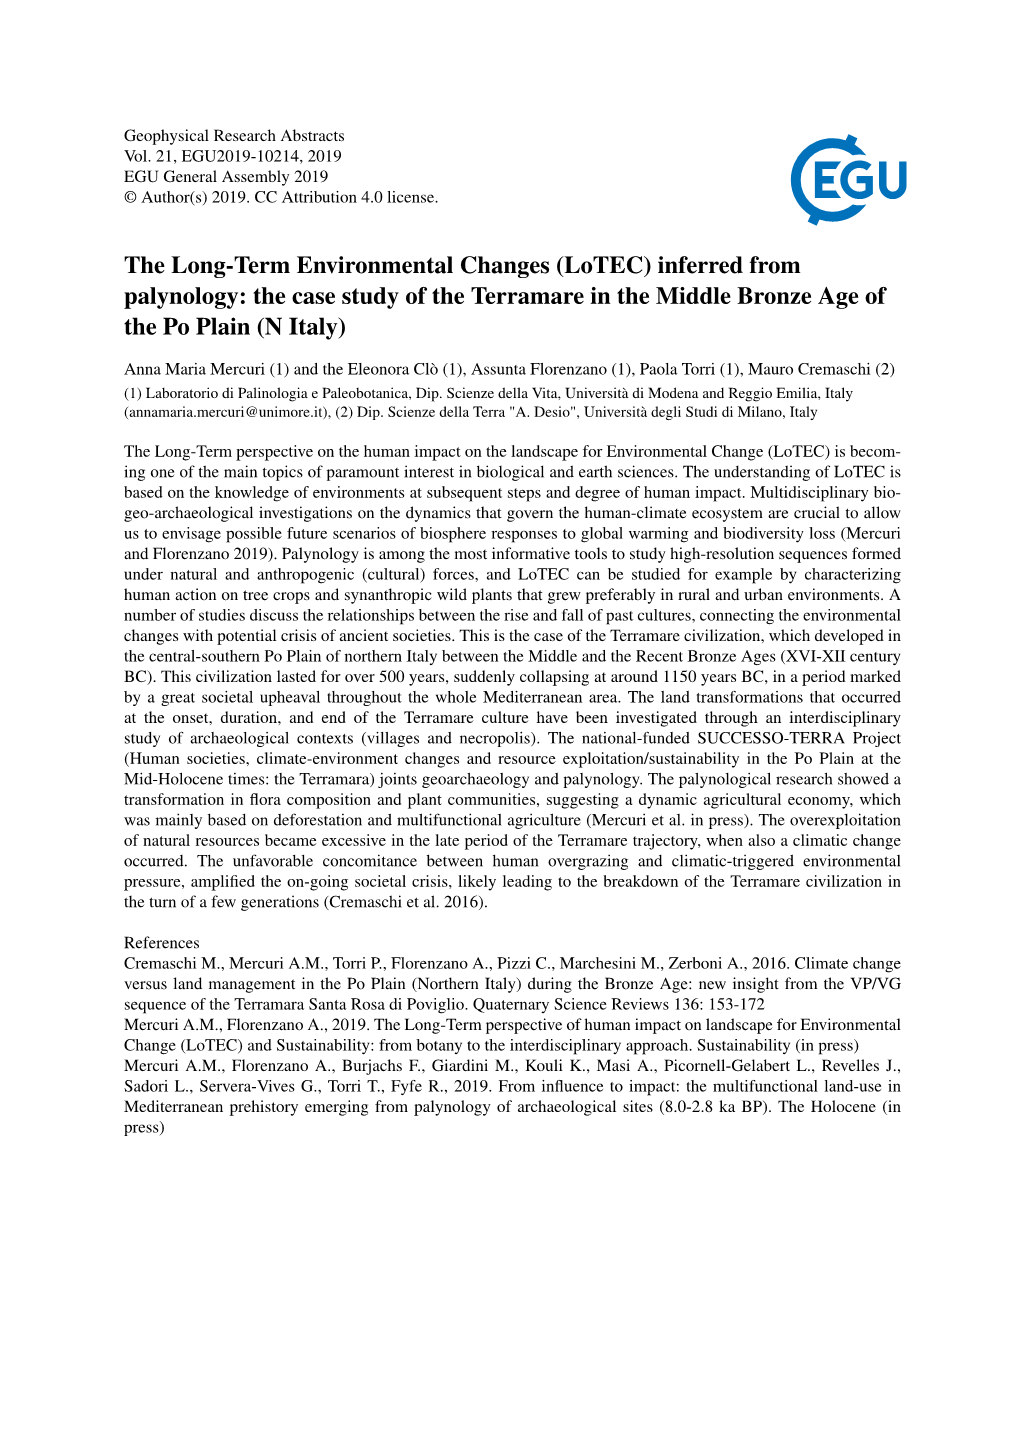 The Long-Term Environmental Changes (Lotec) Inferred from Palynology: the Case Study of the Terramare in the Middle Bronze Age of the Po Plain (N Italy)